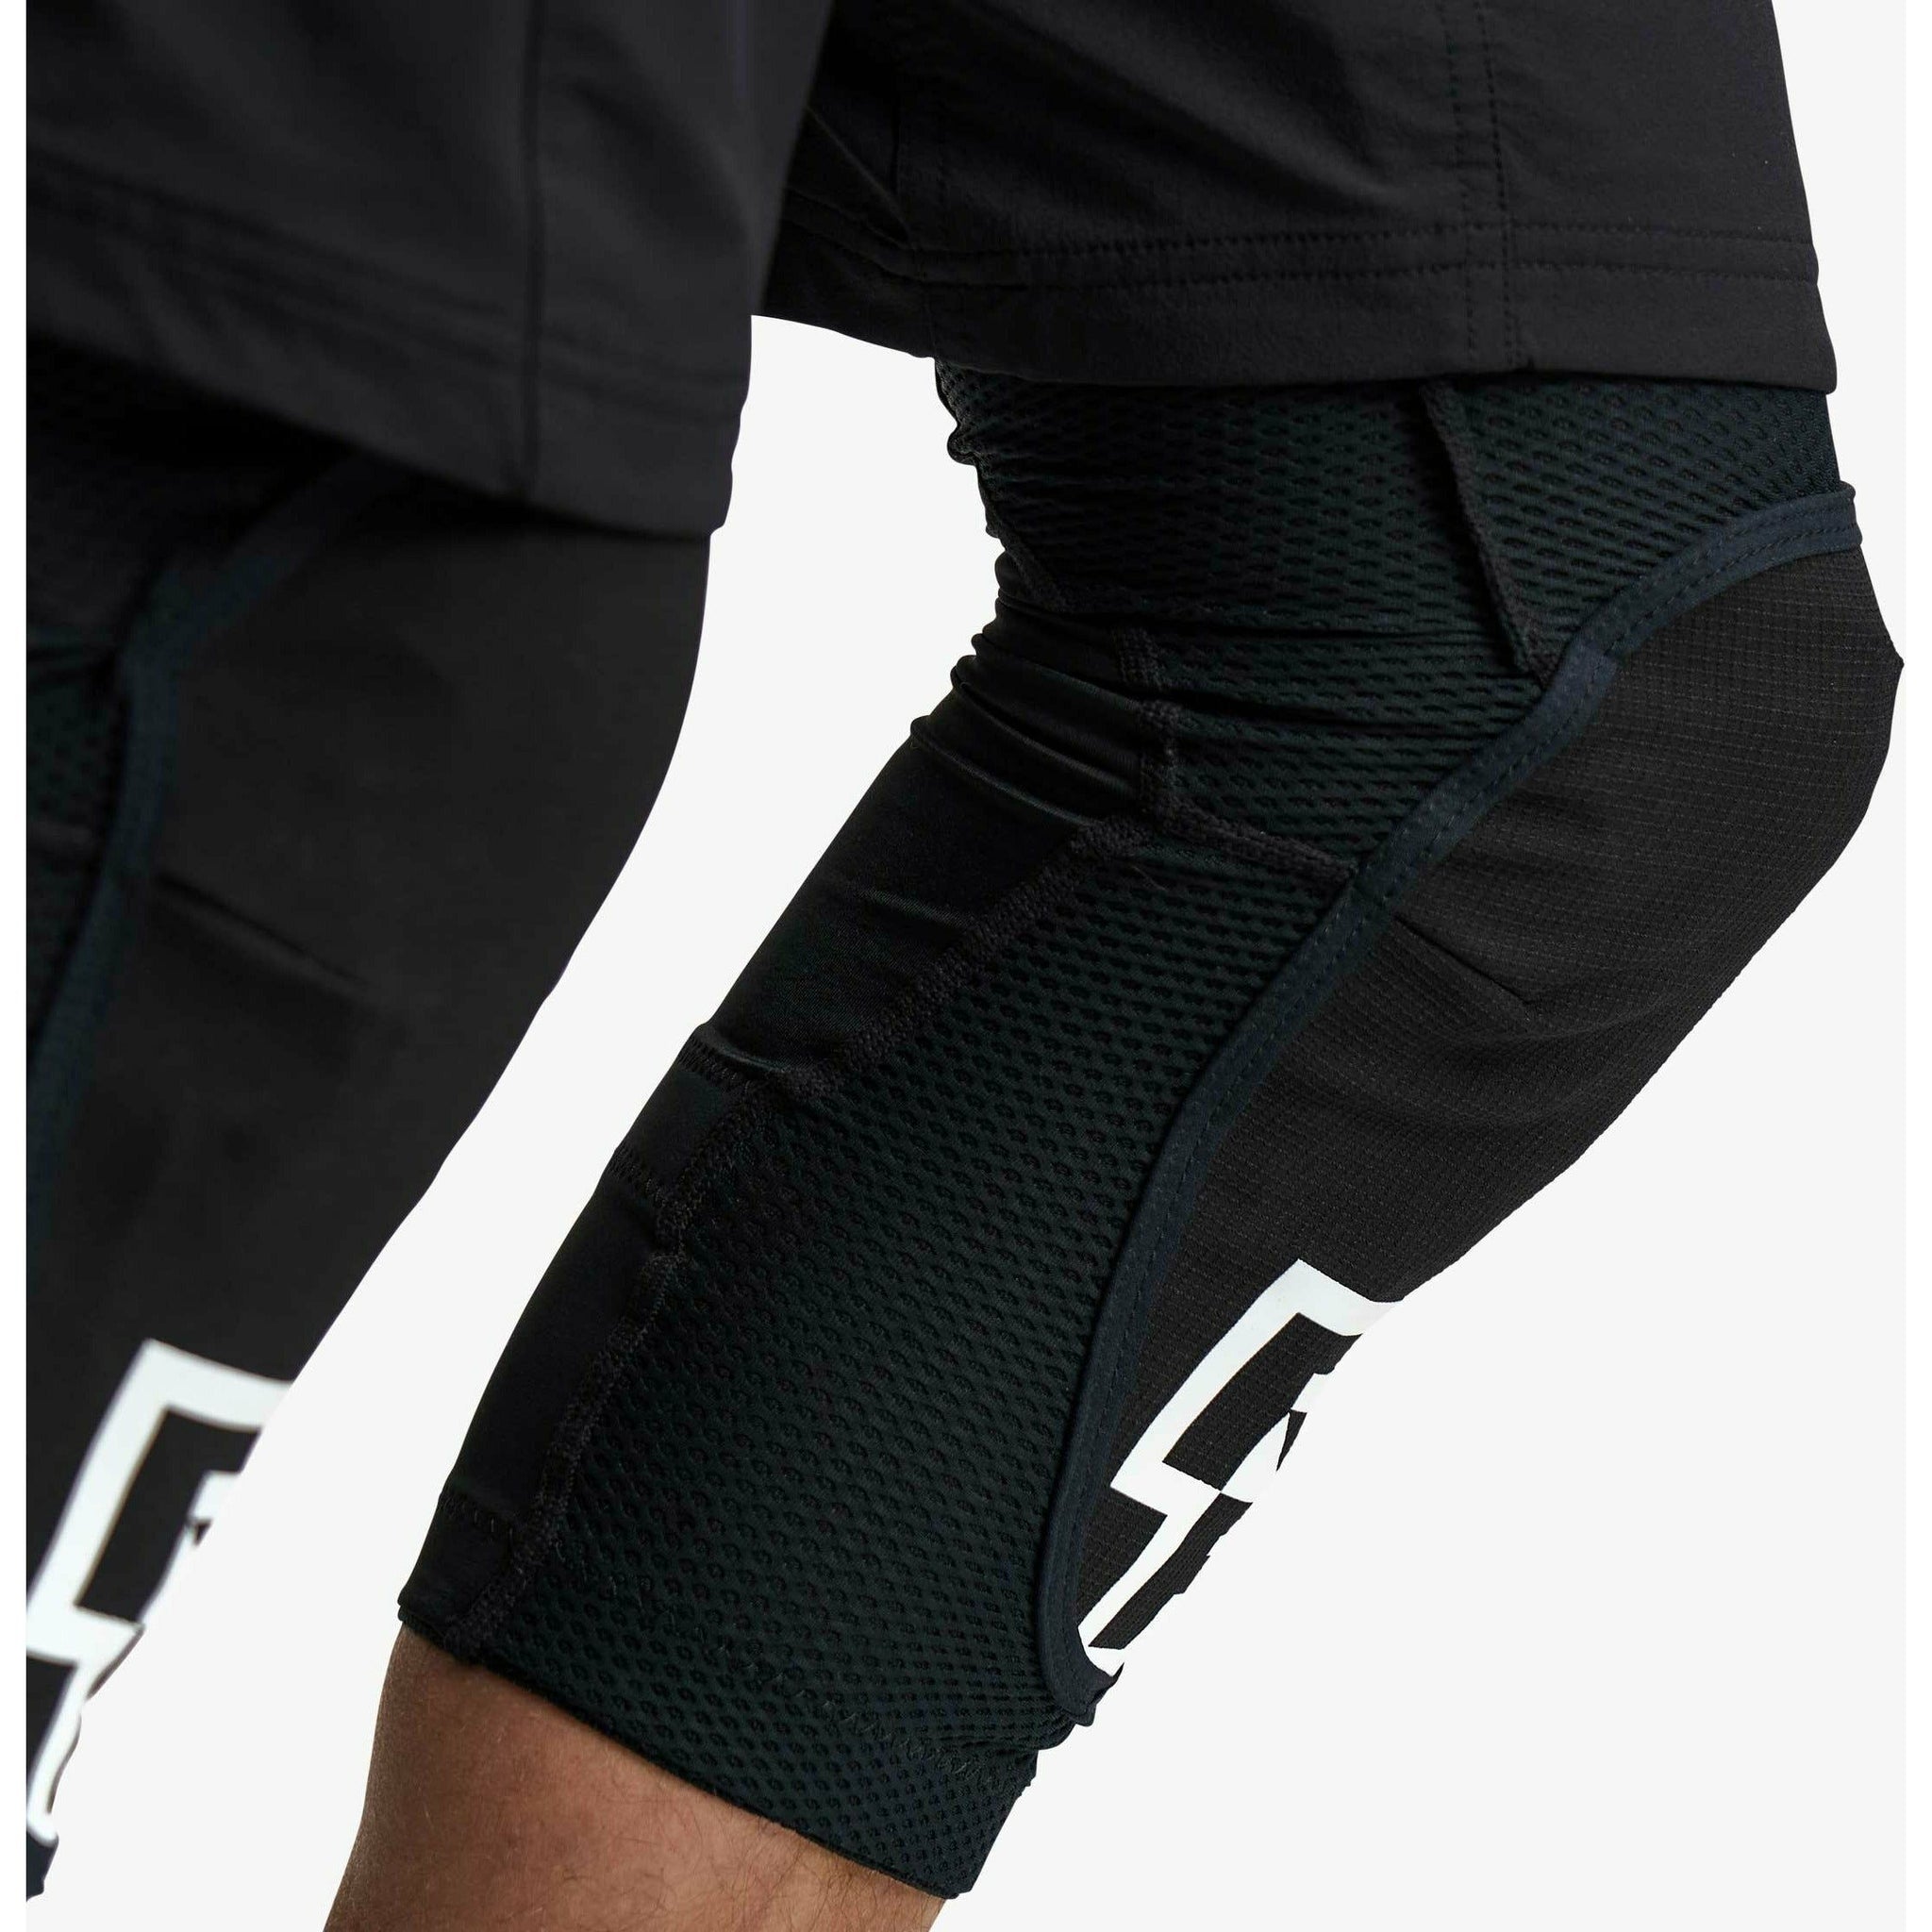 Protection Genoux Covert||Covert Knee Pad